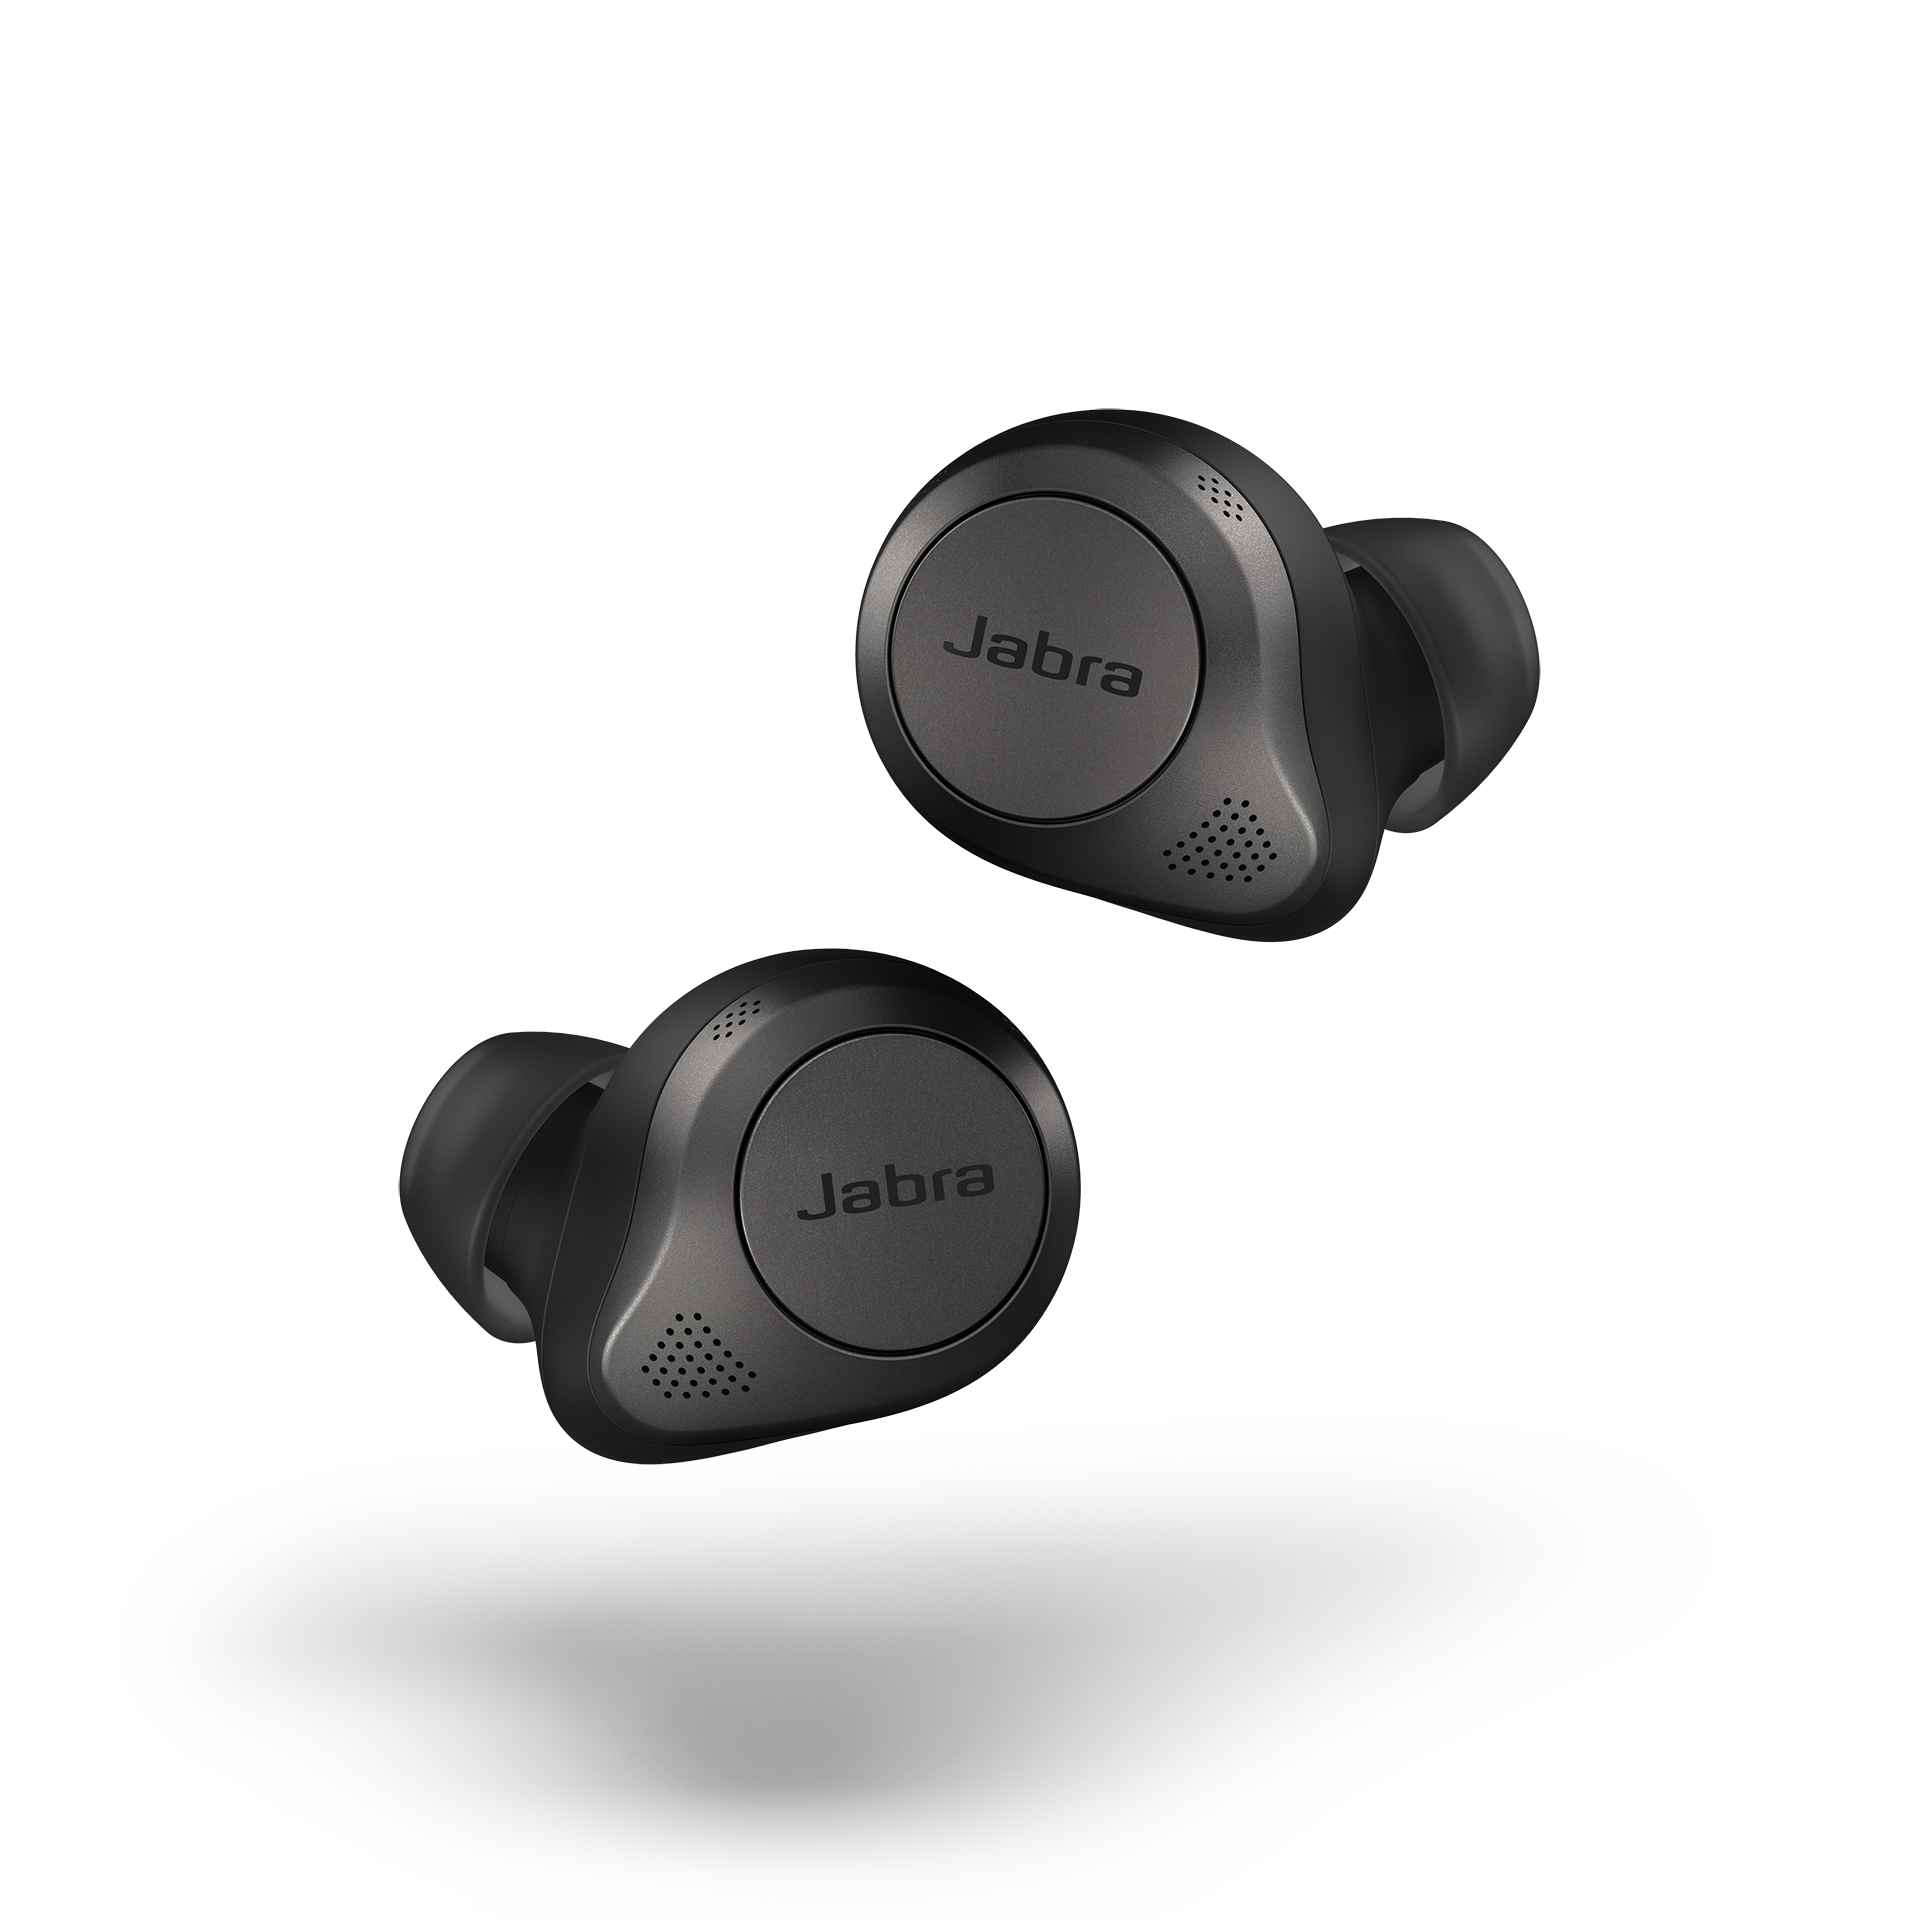 Jabra Elite 85t True Wireless Earbuds - Jabra Advanced Active Noise Cancellation with Long Battery Life, Powerful Speakers and Alexa Built-in - Wireless Charging Case - Titanium Black